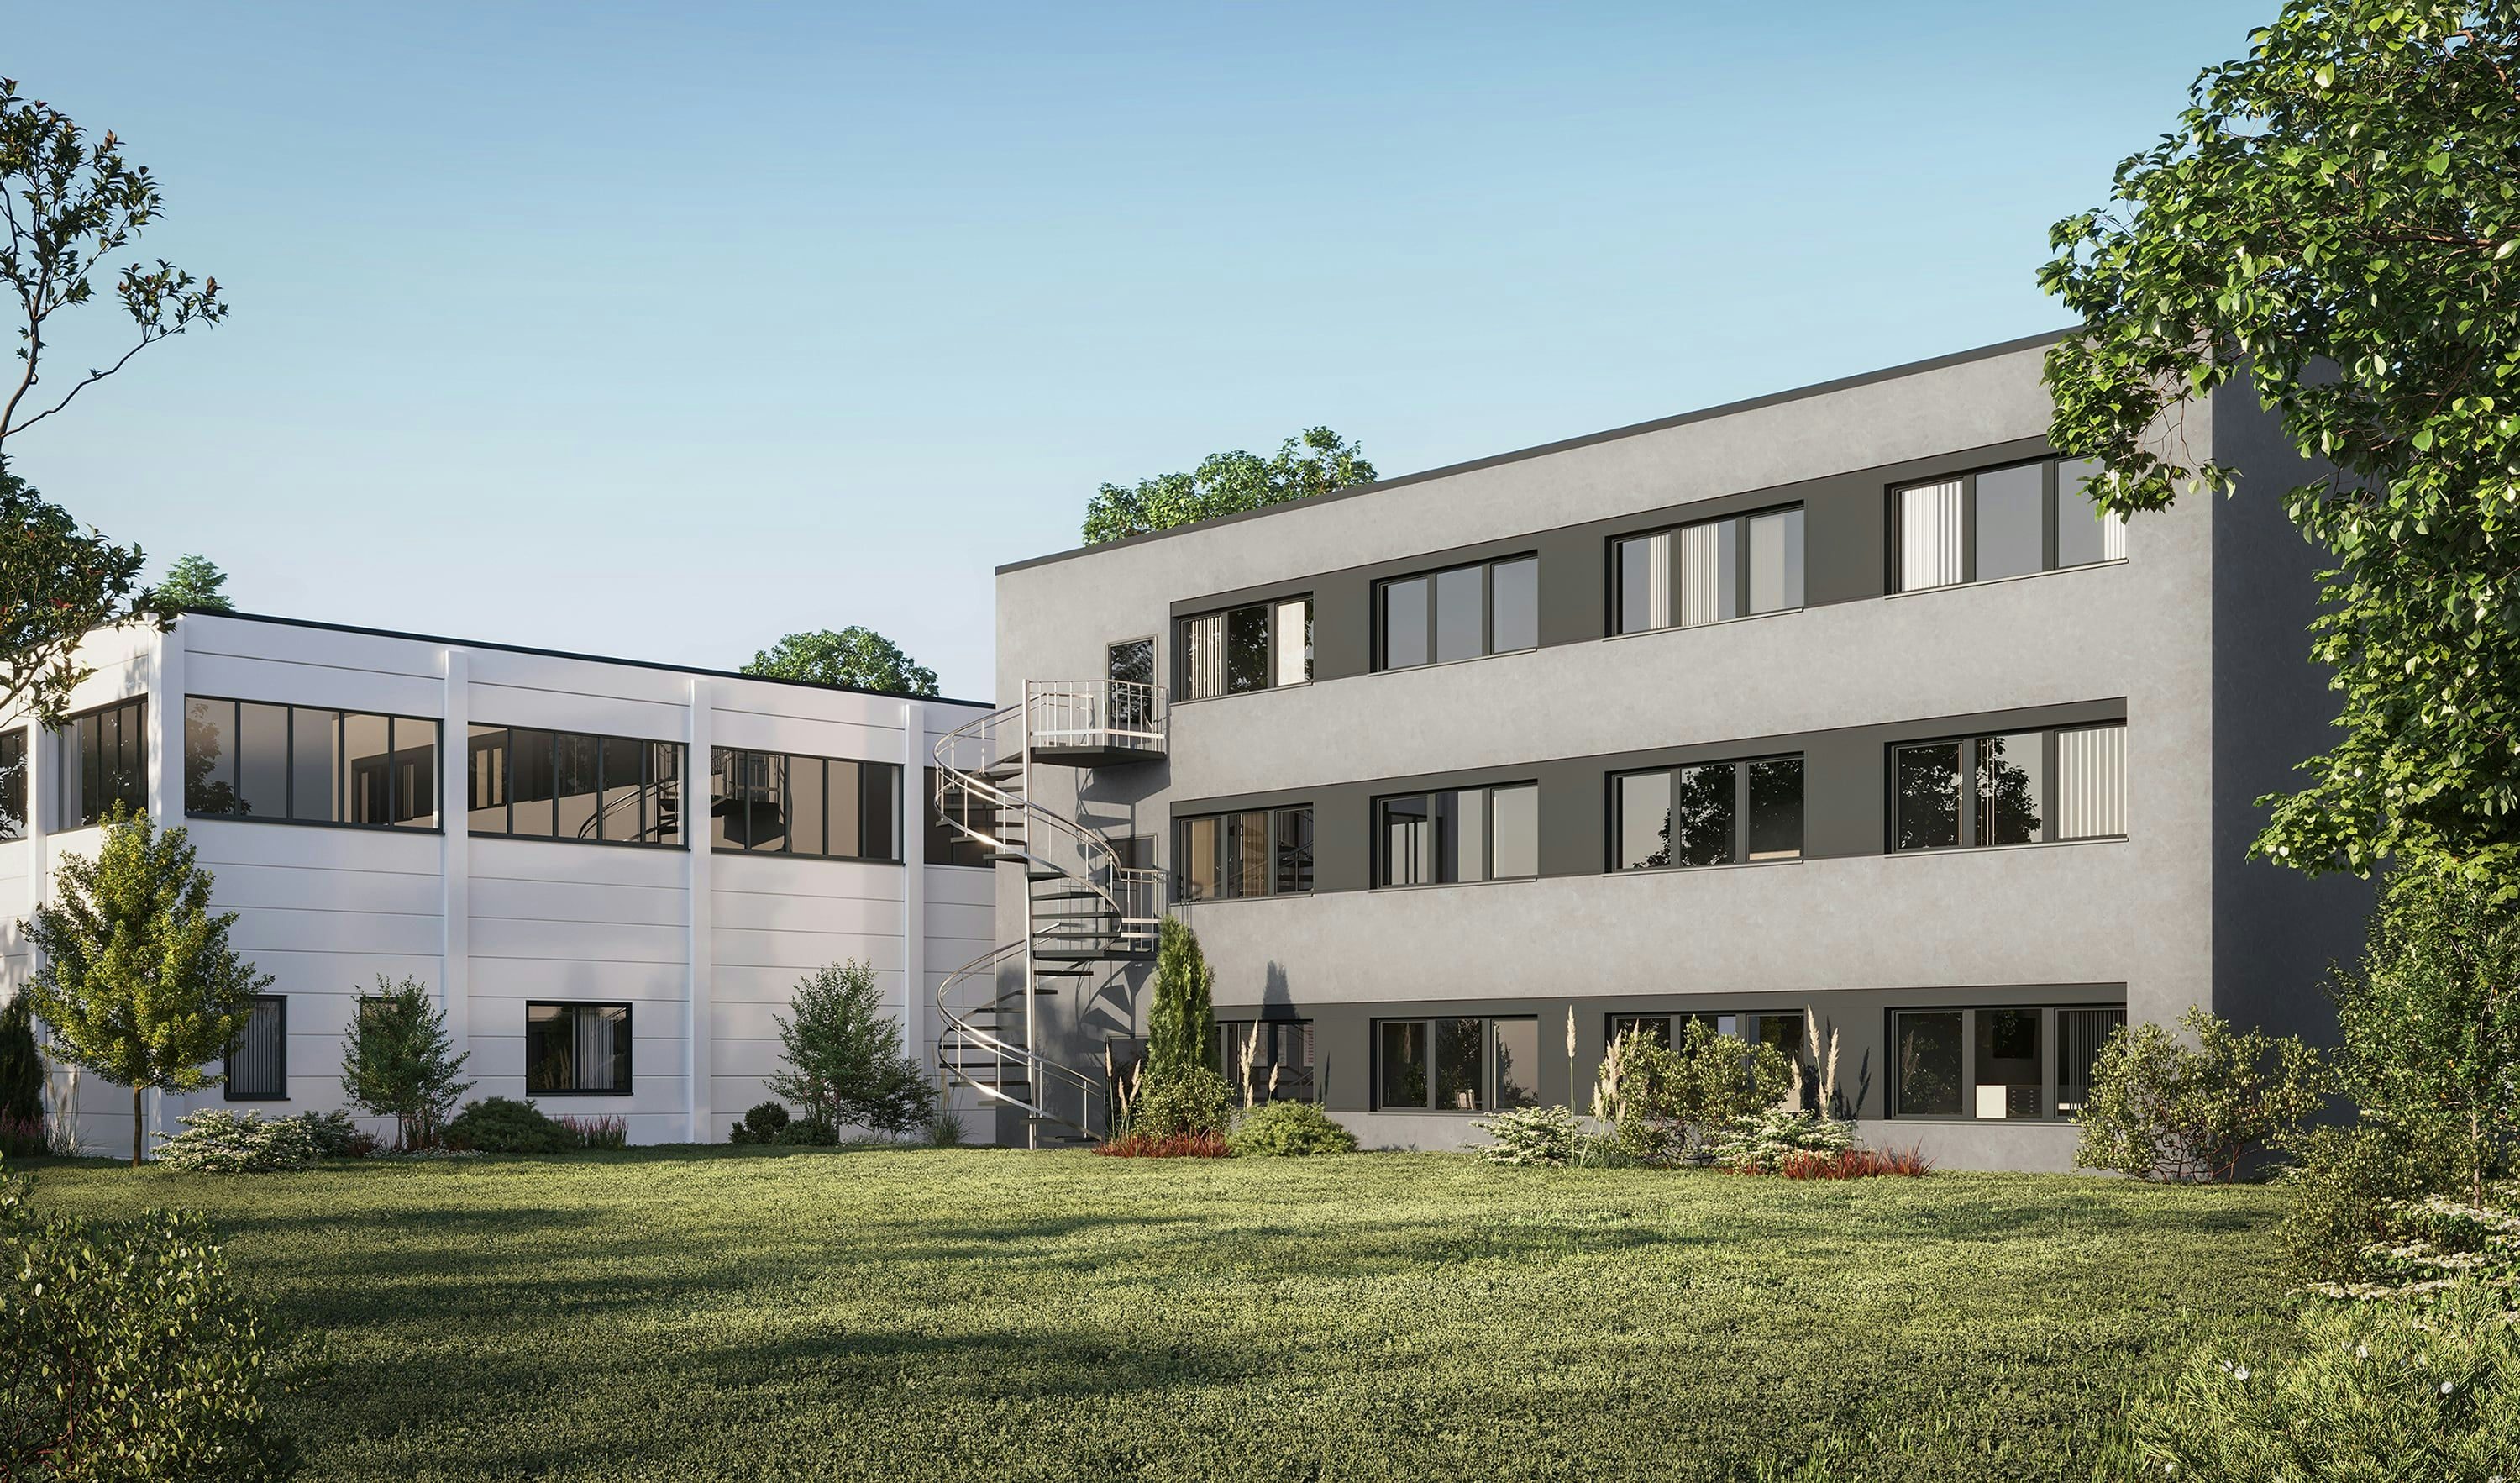 3D architectural visualization of renovation of the office building with backyard in Lemgo, Germany